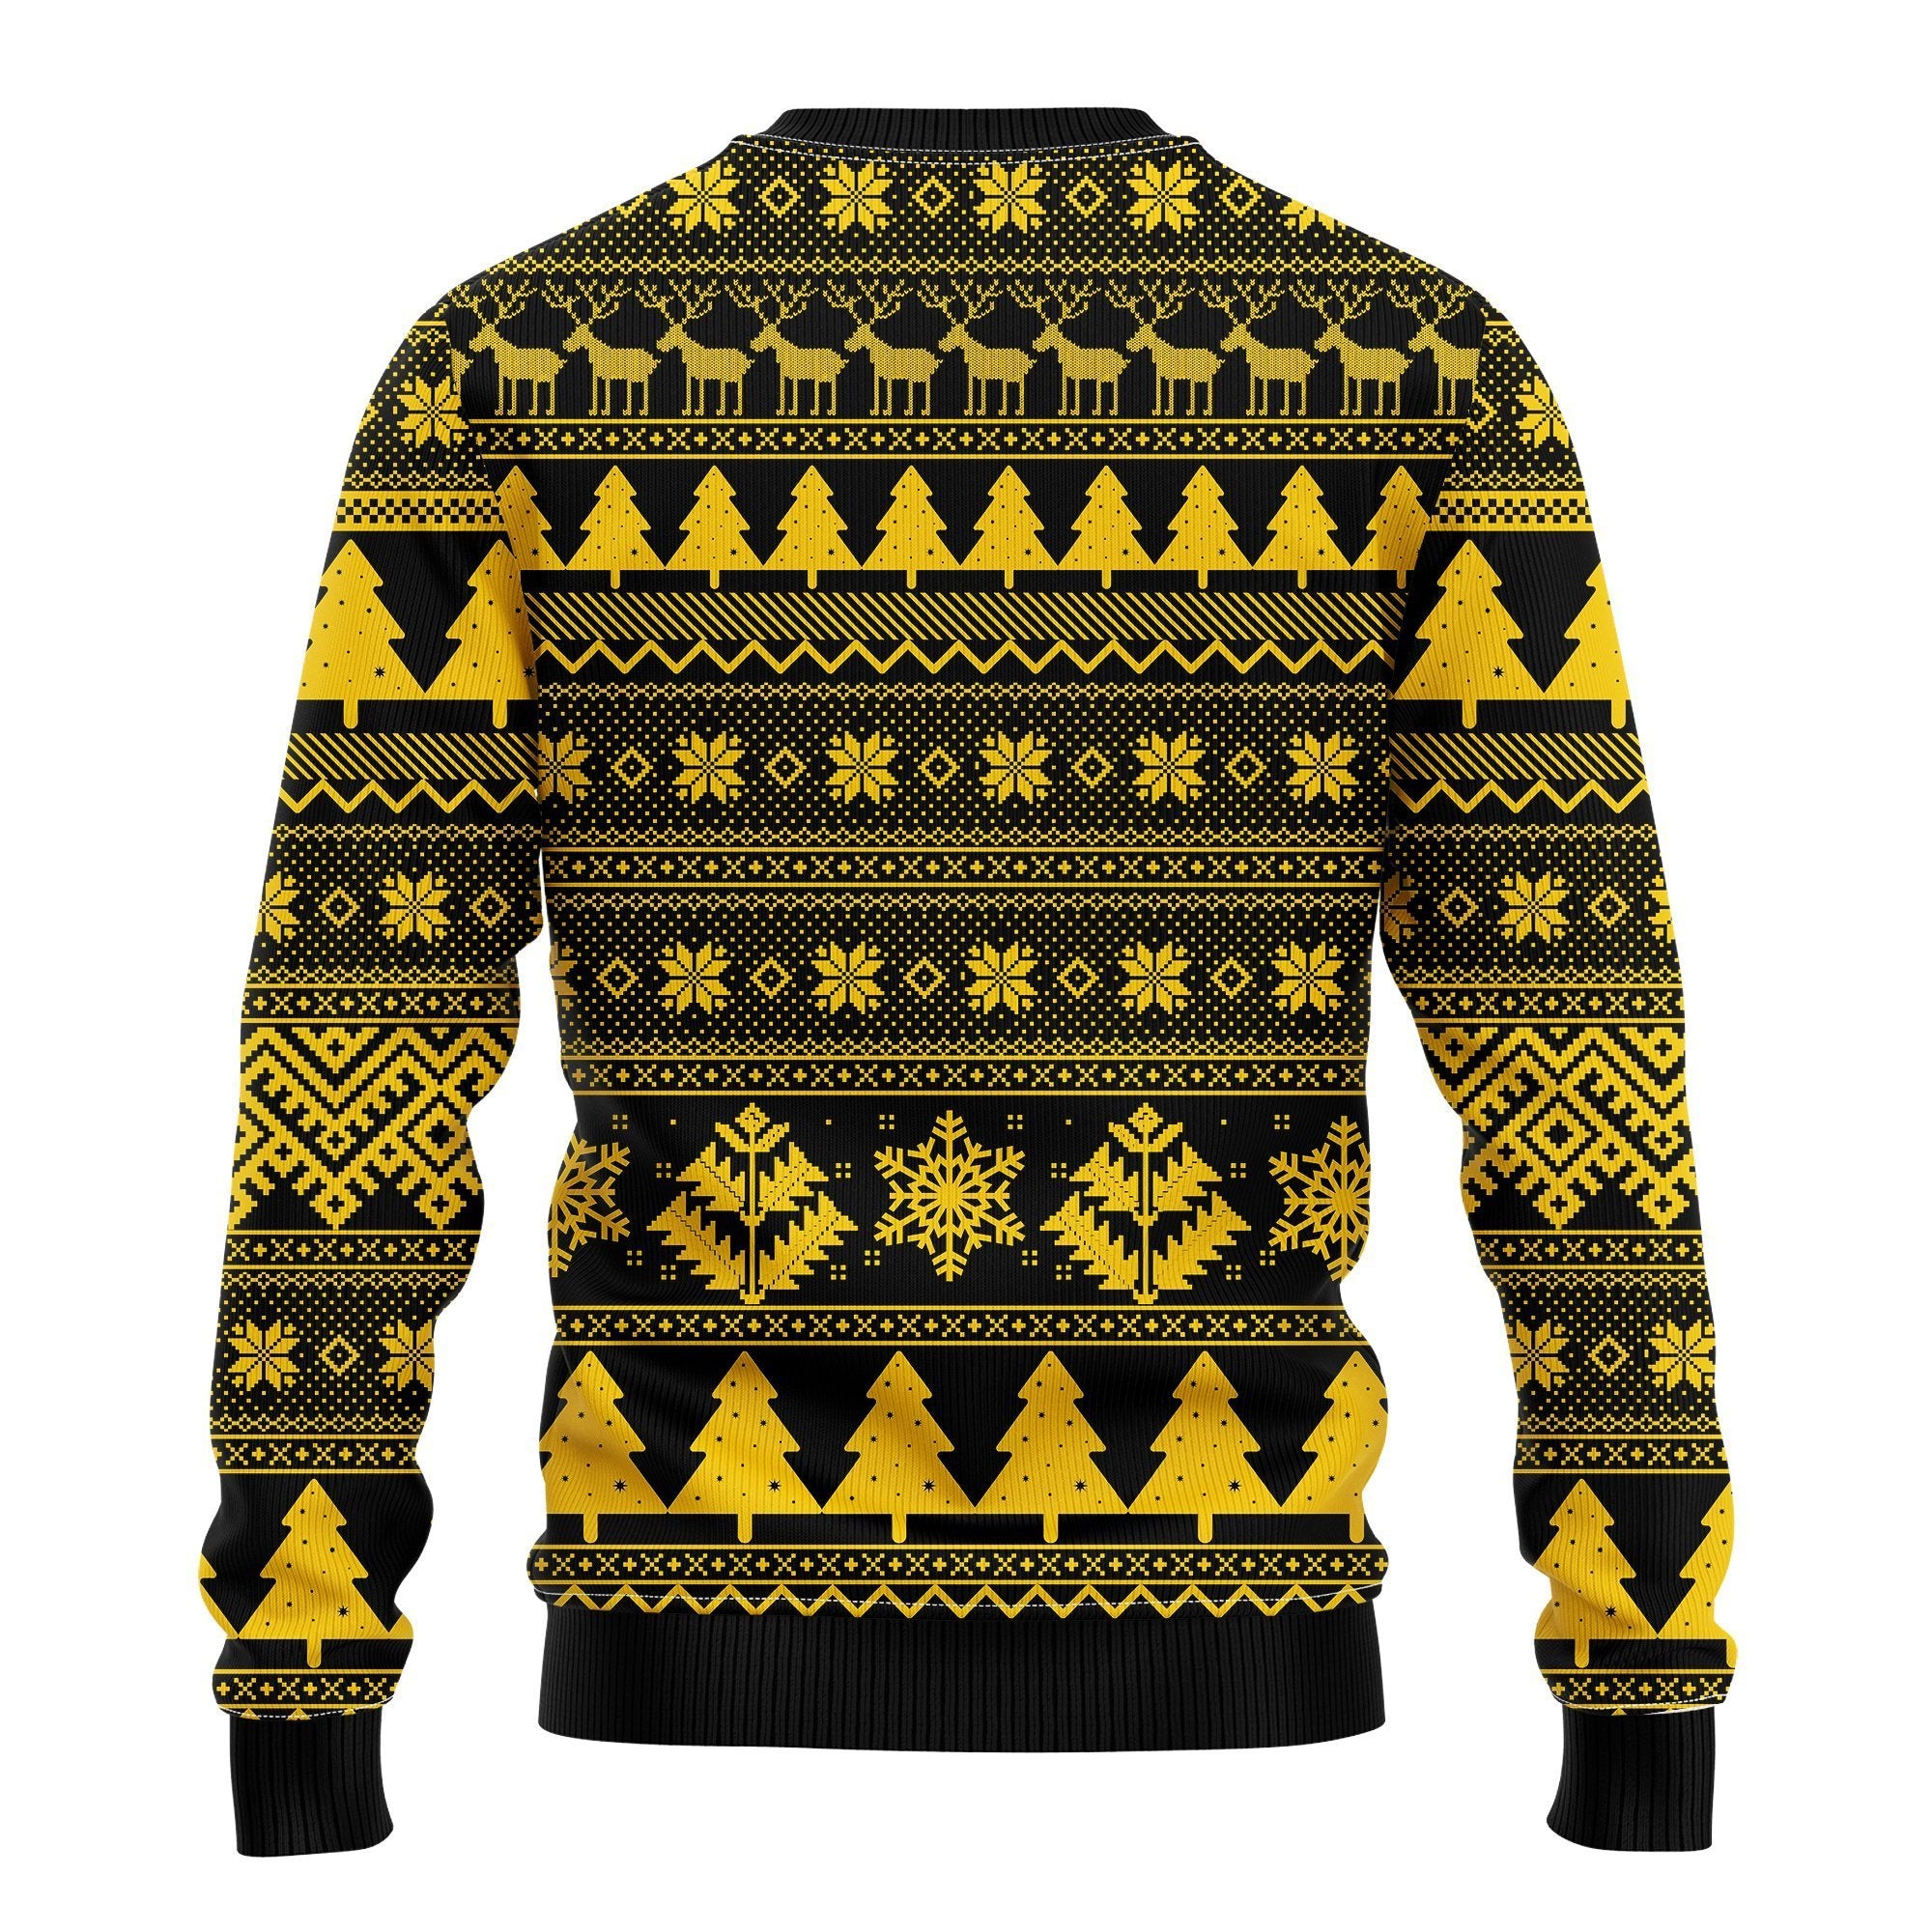 Star Wars Yellow Ugly Christmas Sweater Amazing Gift Idea Thanksgiving Gift